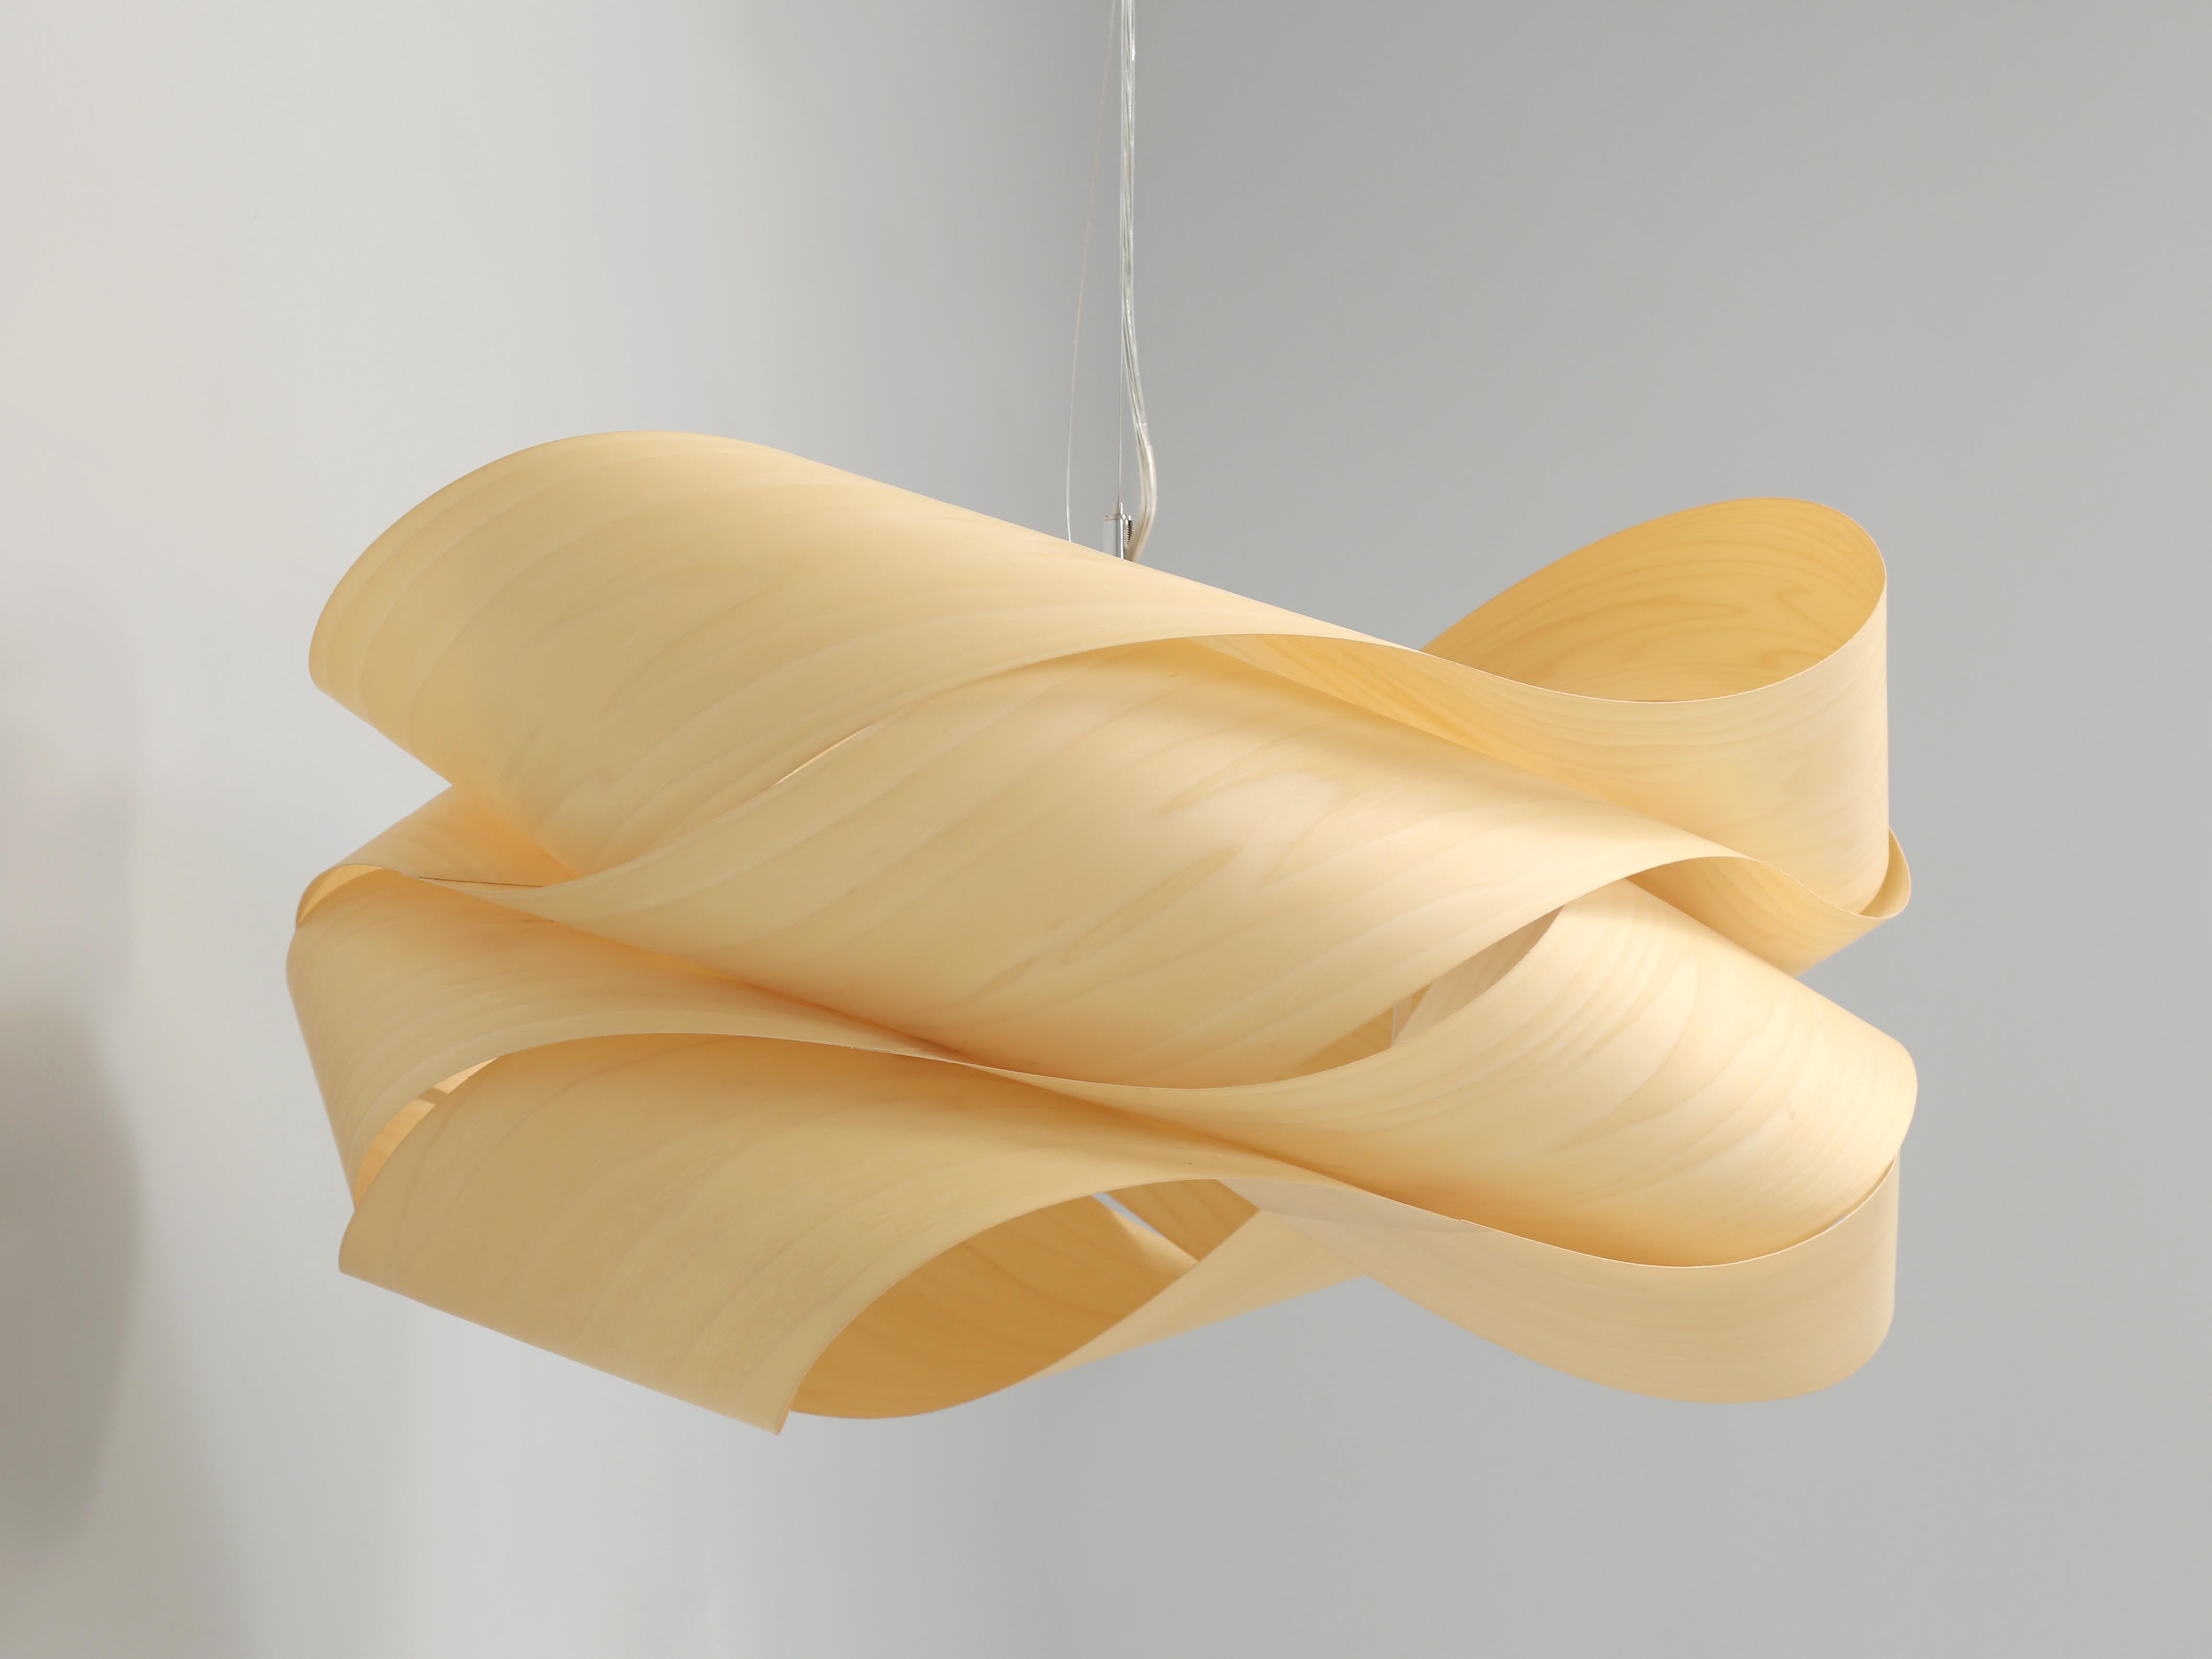 The LZF Link Wood Veneer Pendant chandelier was designed by Ray Power. For those of you who are familiar with our Old Plank inventory, you will notice that this very modern style chandelier is quite out of character for us. However, there is